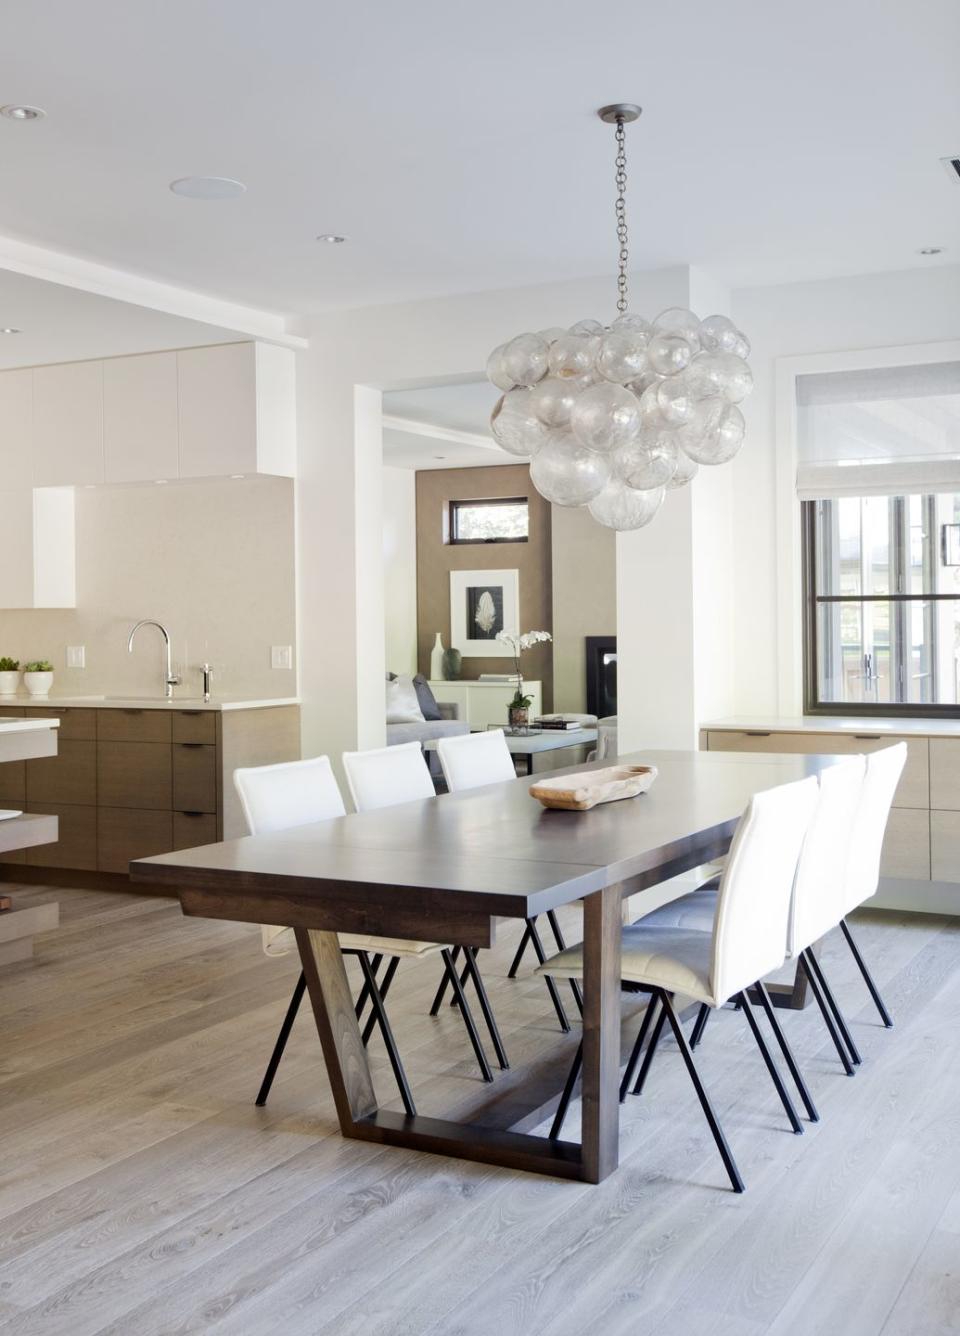 A sculptural lighting fixture adds to this stylish dining area